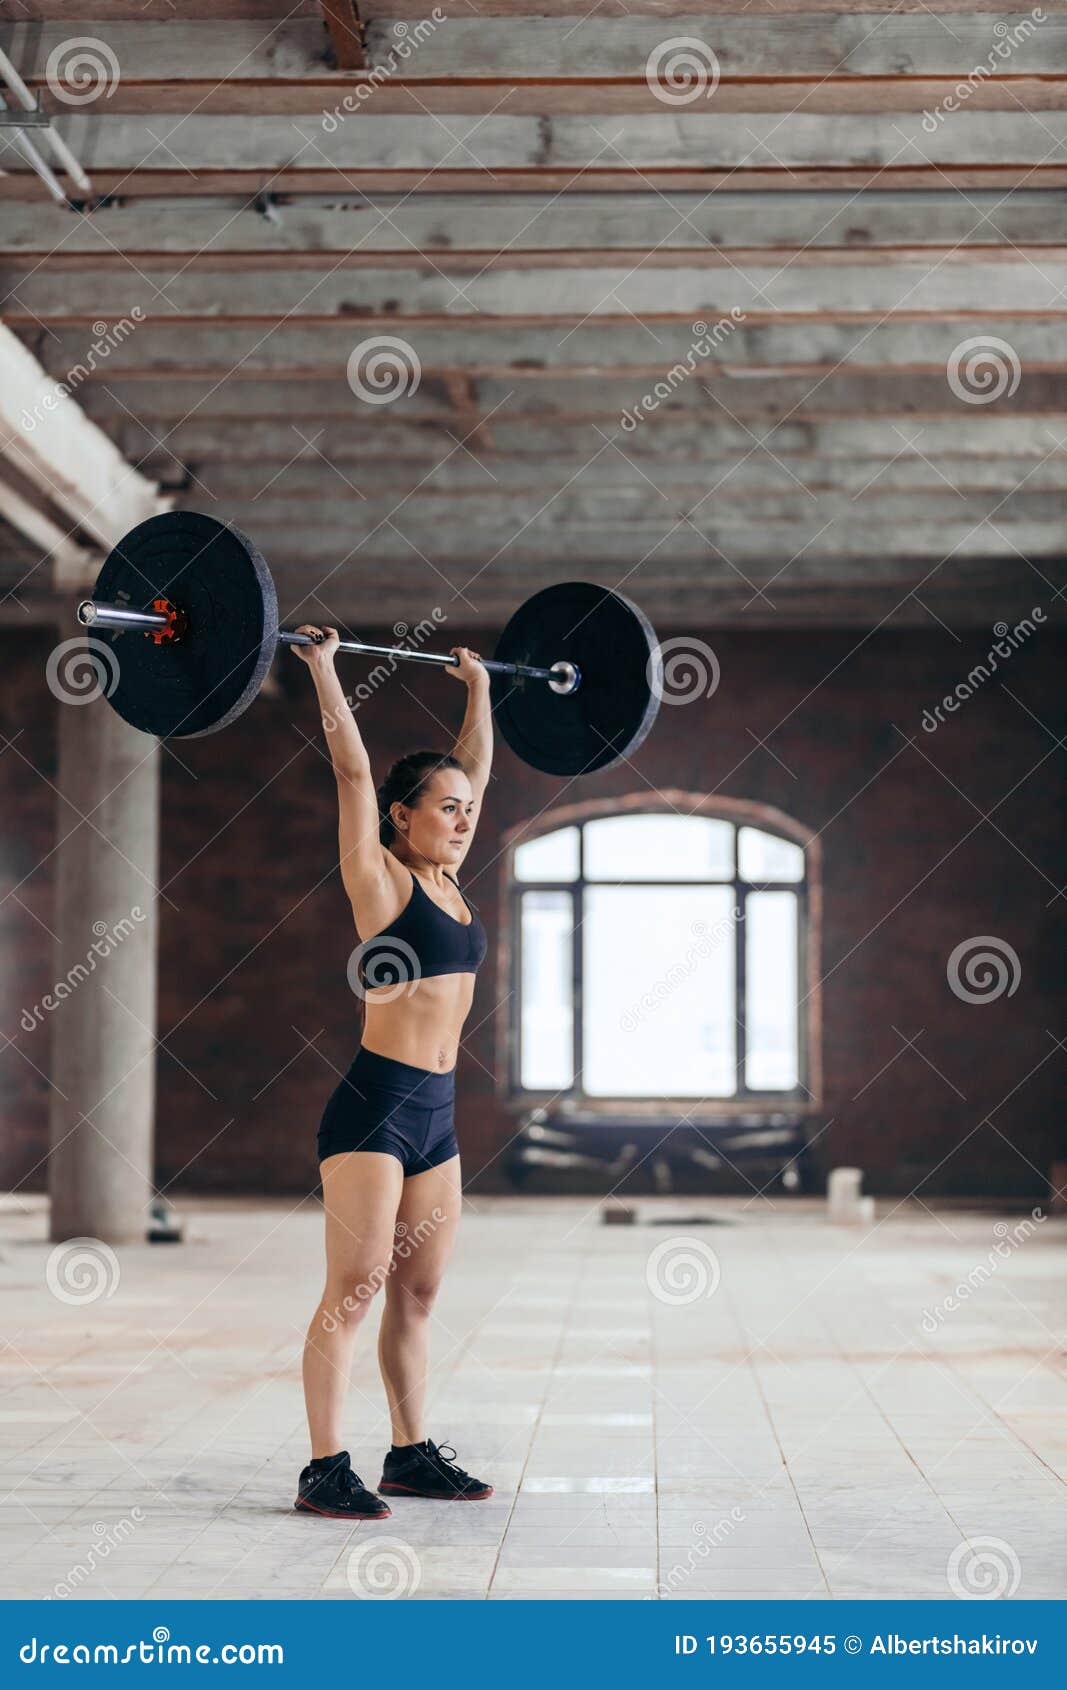 Powerful Girl Standing at Gym Lifting Heavybarbell Over Her Head Stock ...